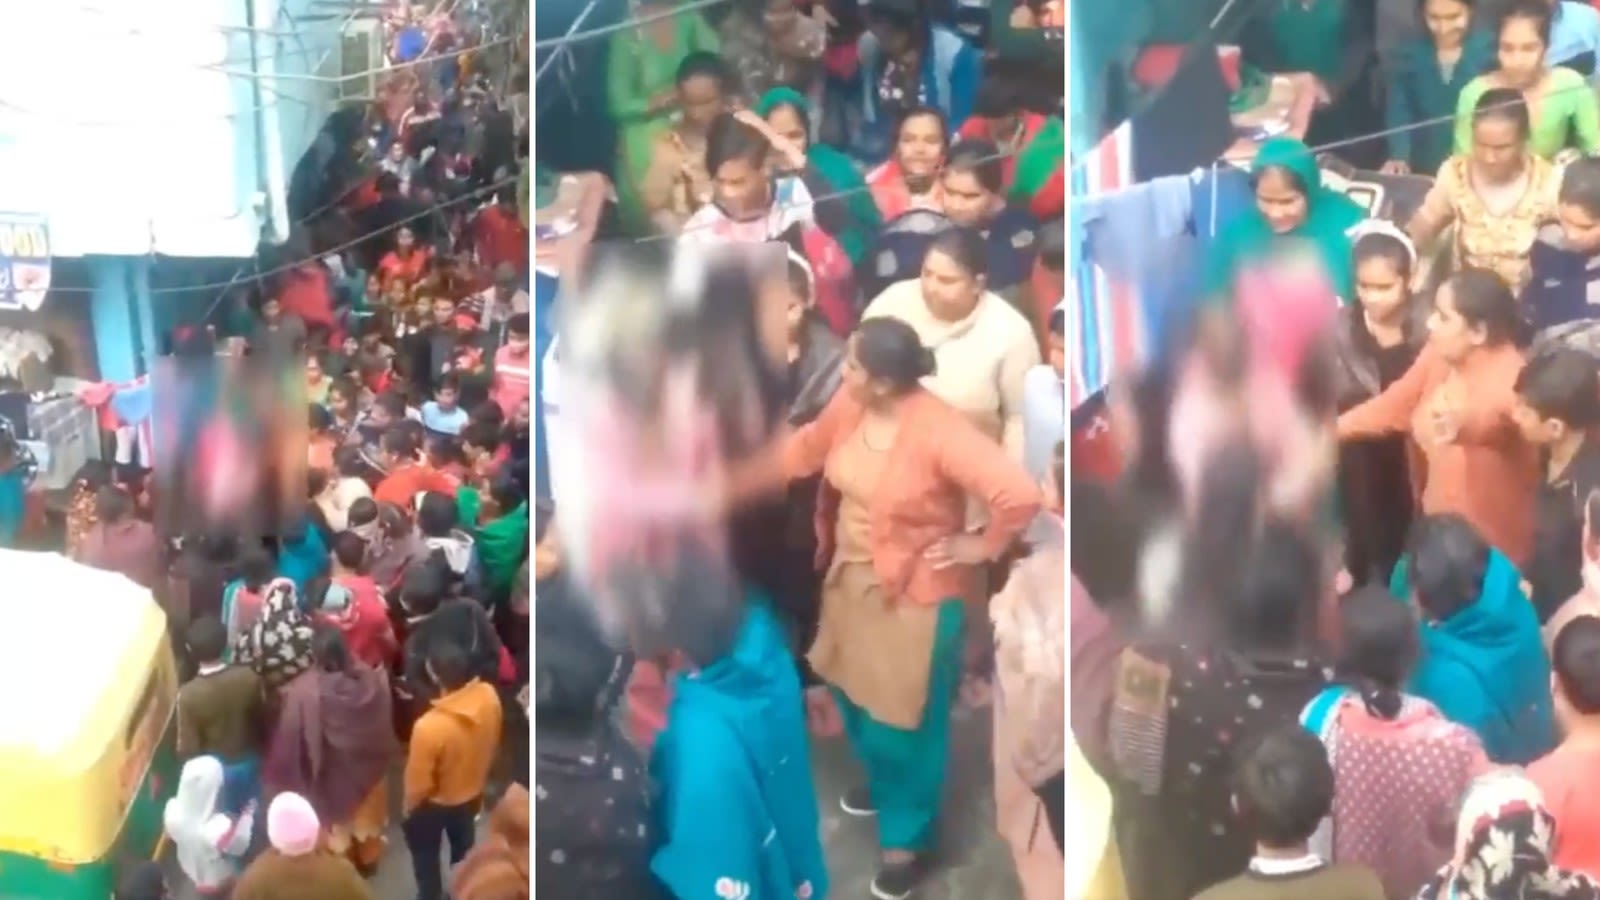 Free Download Real Indian Desi Rape Brother Sister Video - Some people in a cheering crowd called for her to be raped. Many were women  | CNN